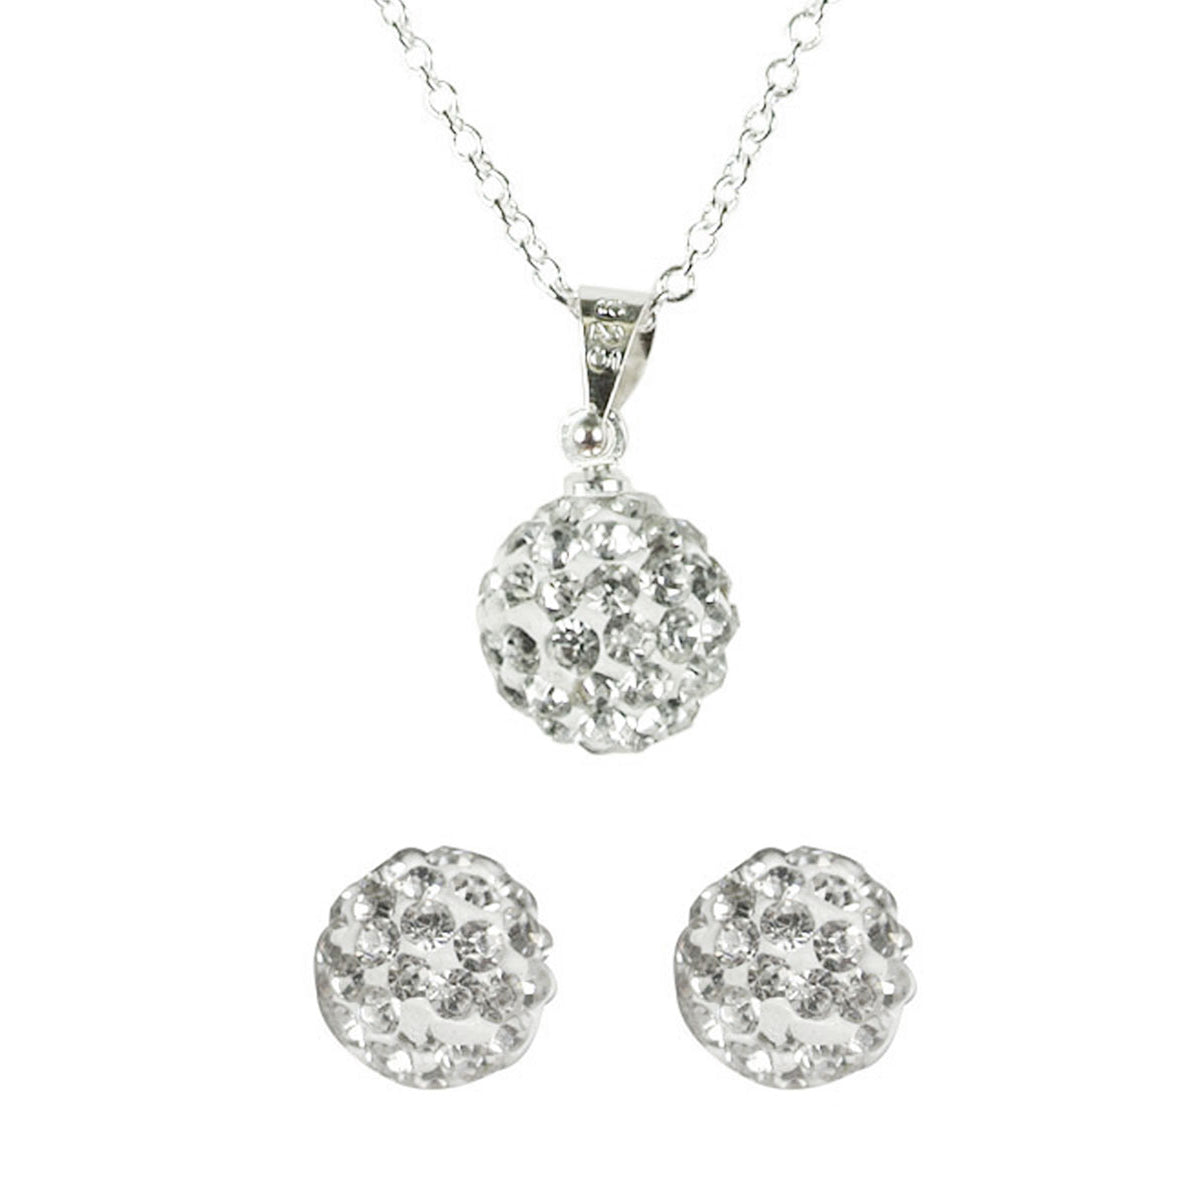 Crystal Disco Ball Pendant Necklace and Stud Earrings Jewelry Set, Silver